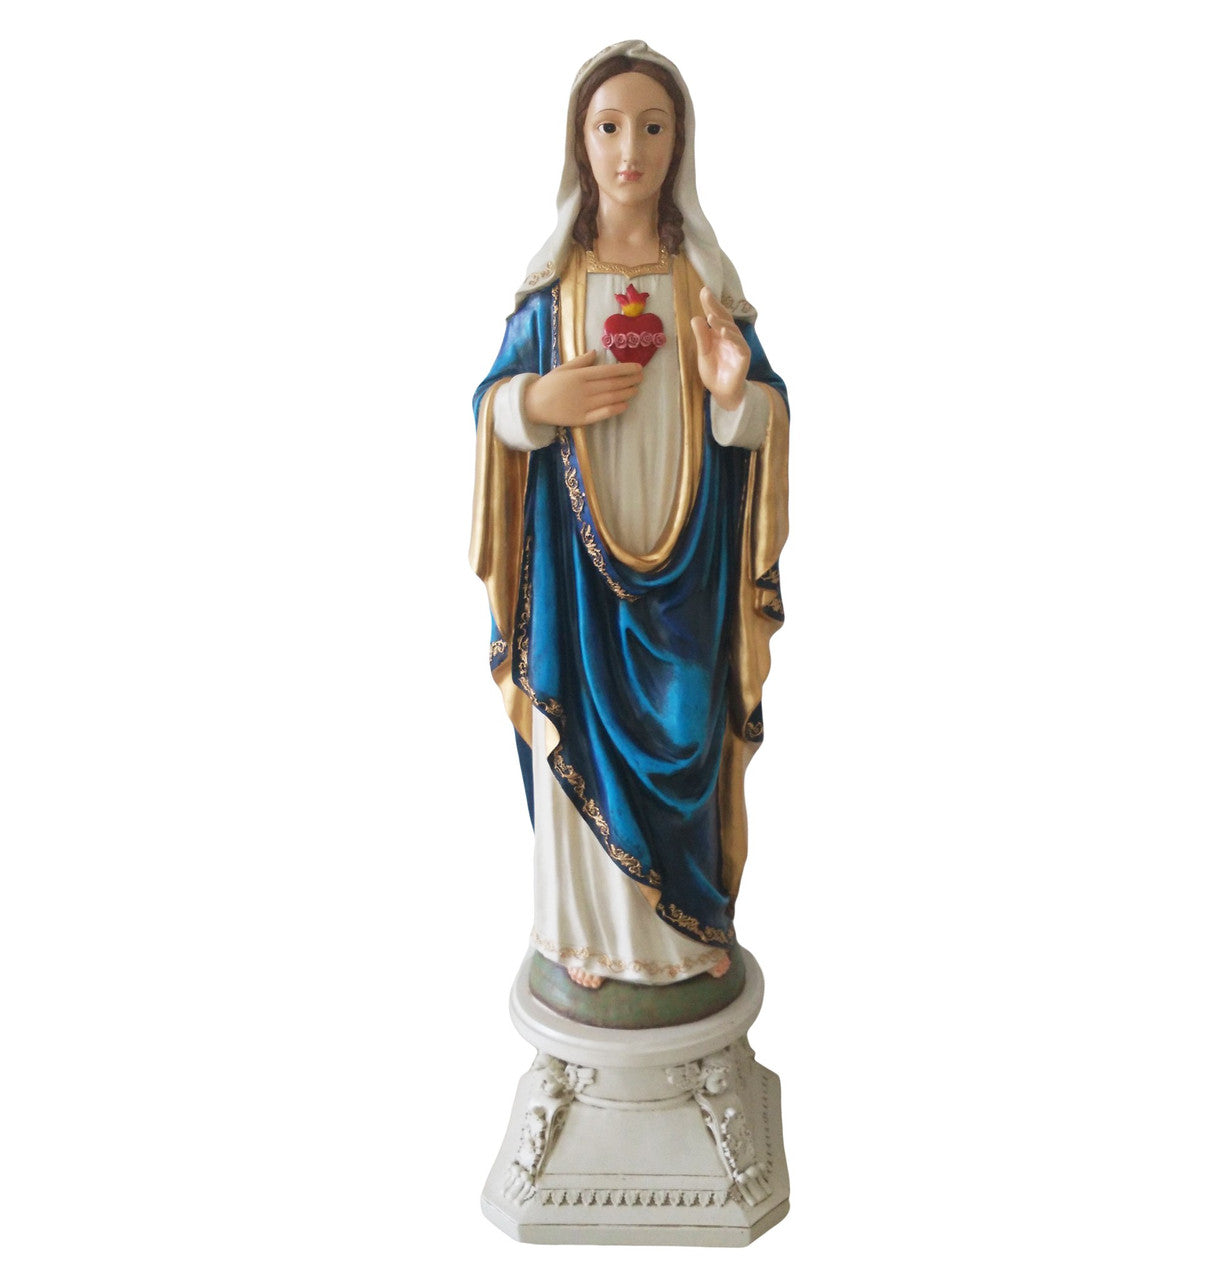 Madonna 41" tall Statue made of high quality ceramic - Royal Gift